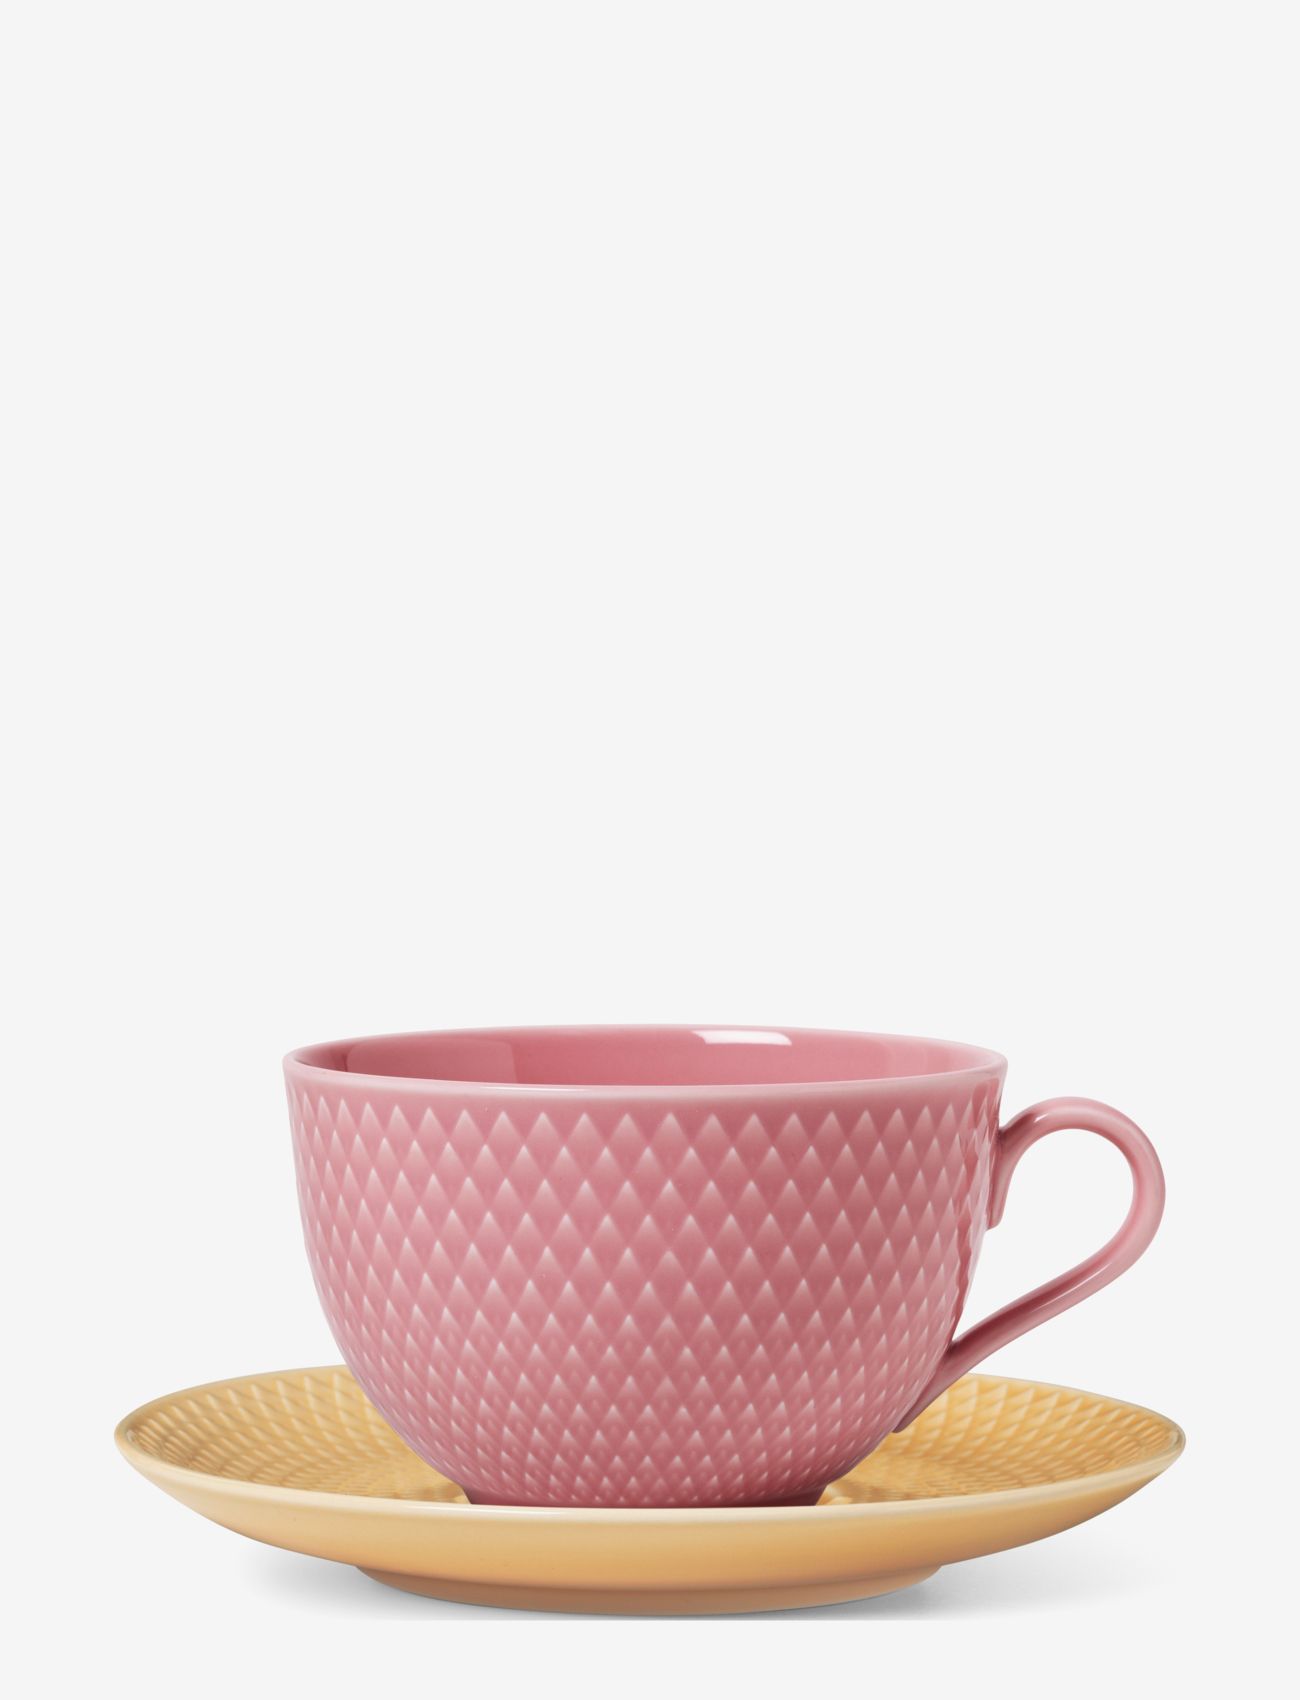 Lyngby Porcelæn - Rhombe Color Tea cup with matching saucer 39 cl rose/sand - die niedrigsten preise - rose/sand - 0